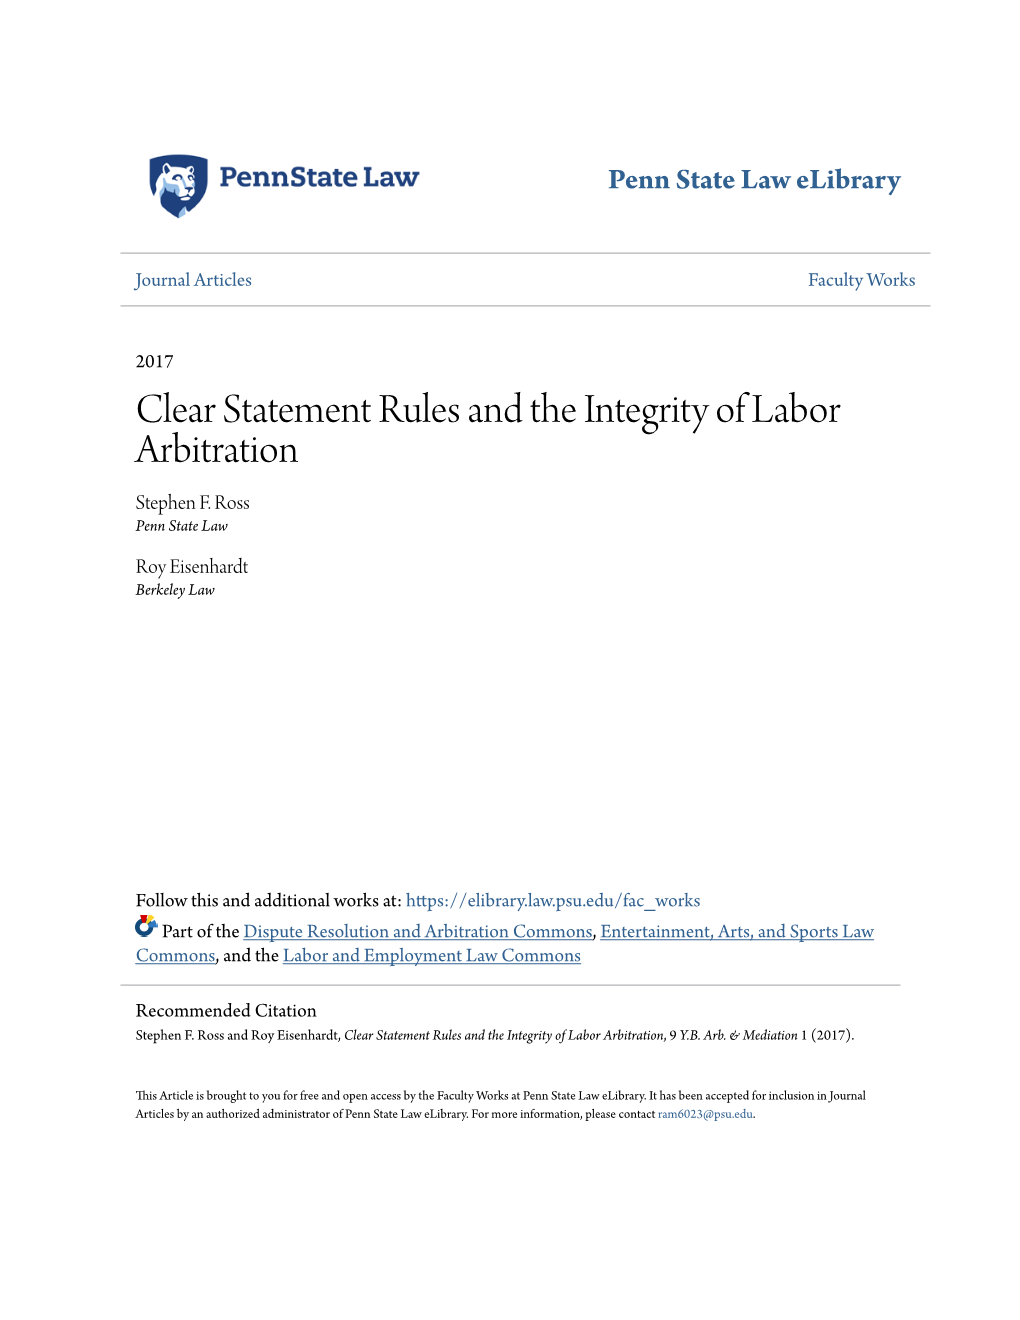 Clear Statement Rules and the Integrity of Labor Arbitration Stephen F